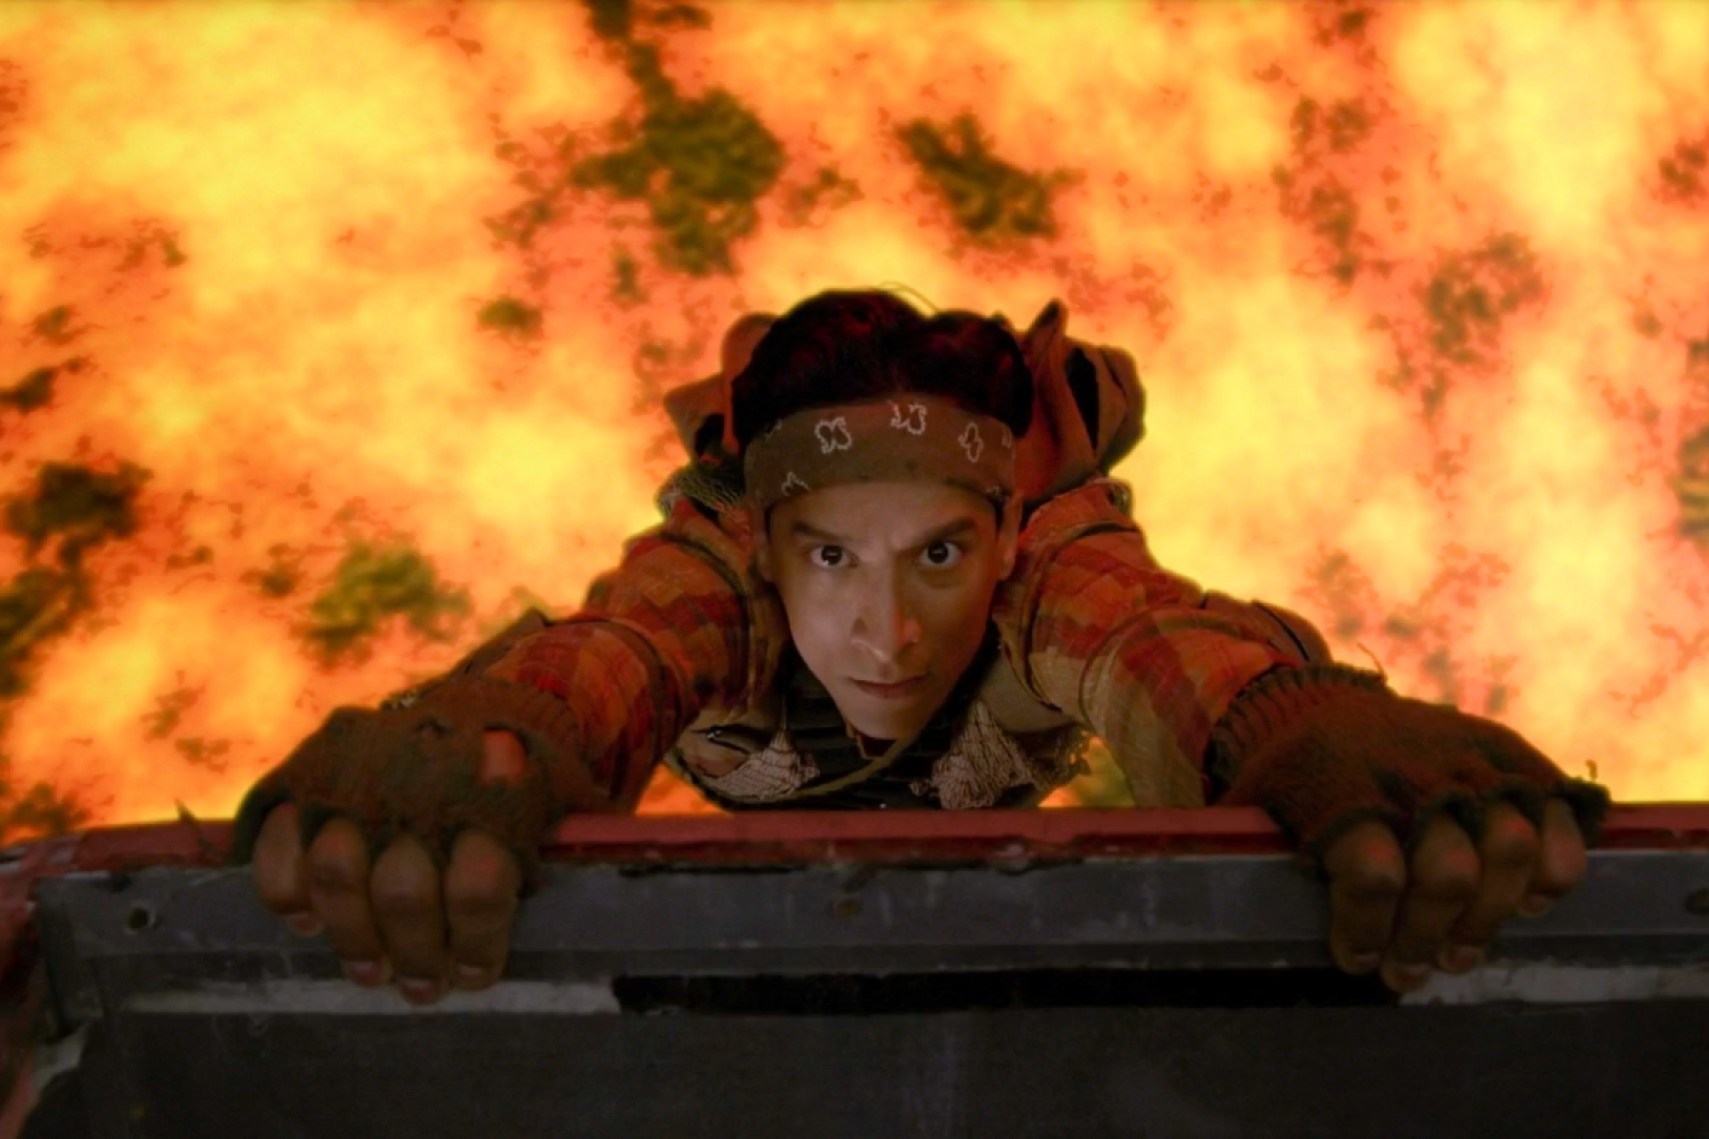 Still from Community episode Geothermal Escapism; Danny Pudi,  wearing army gear, dangles over lava.